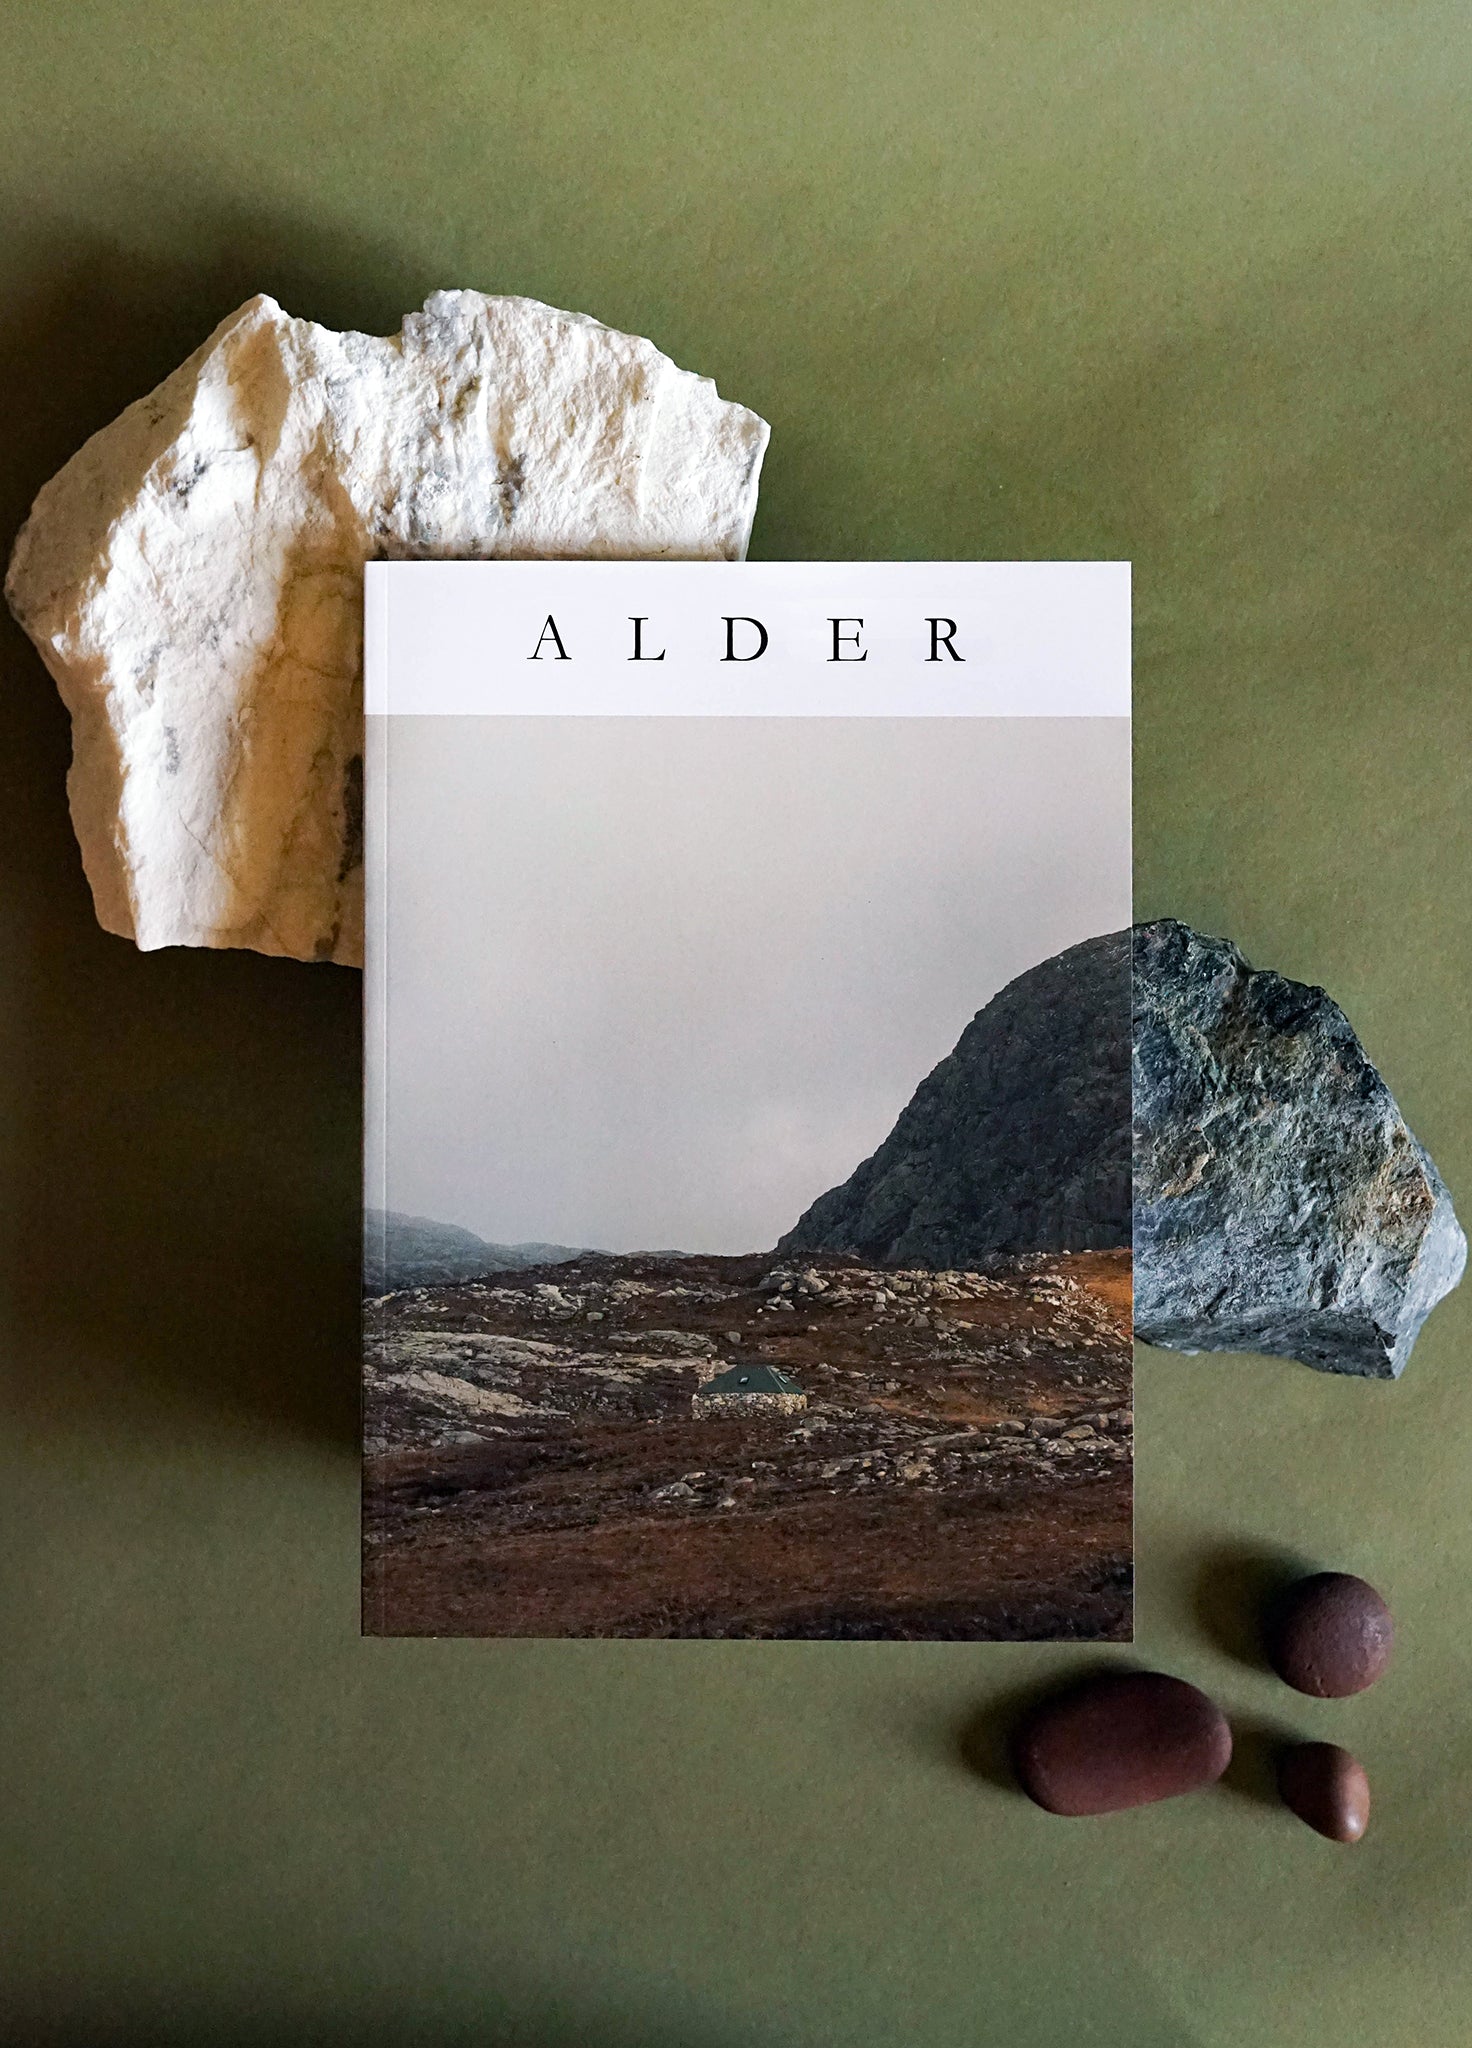 Alder Magazine Issue 1 edited and published independently by Scottish architect Mary Arnold-Forster.